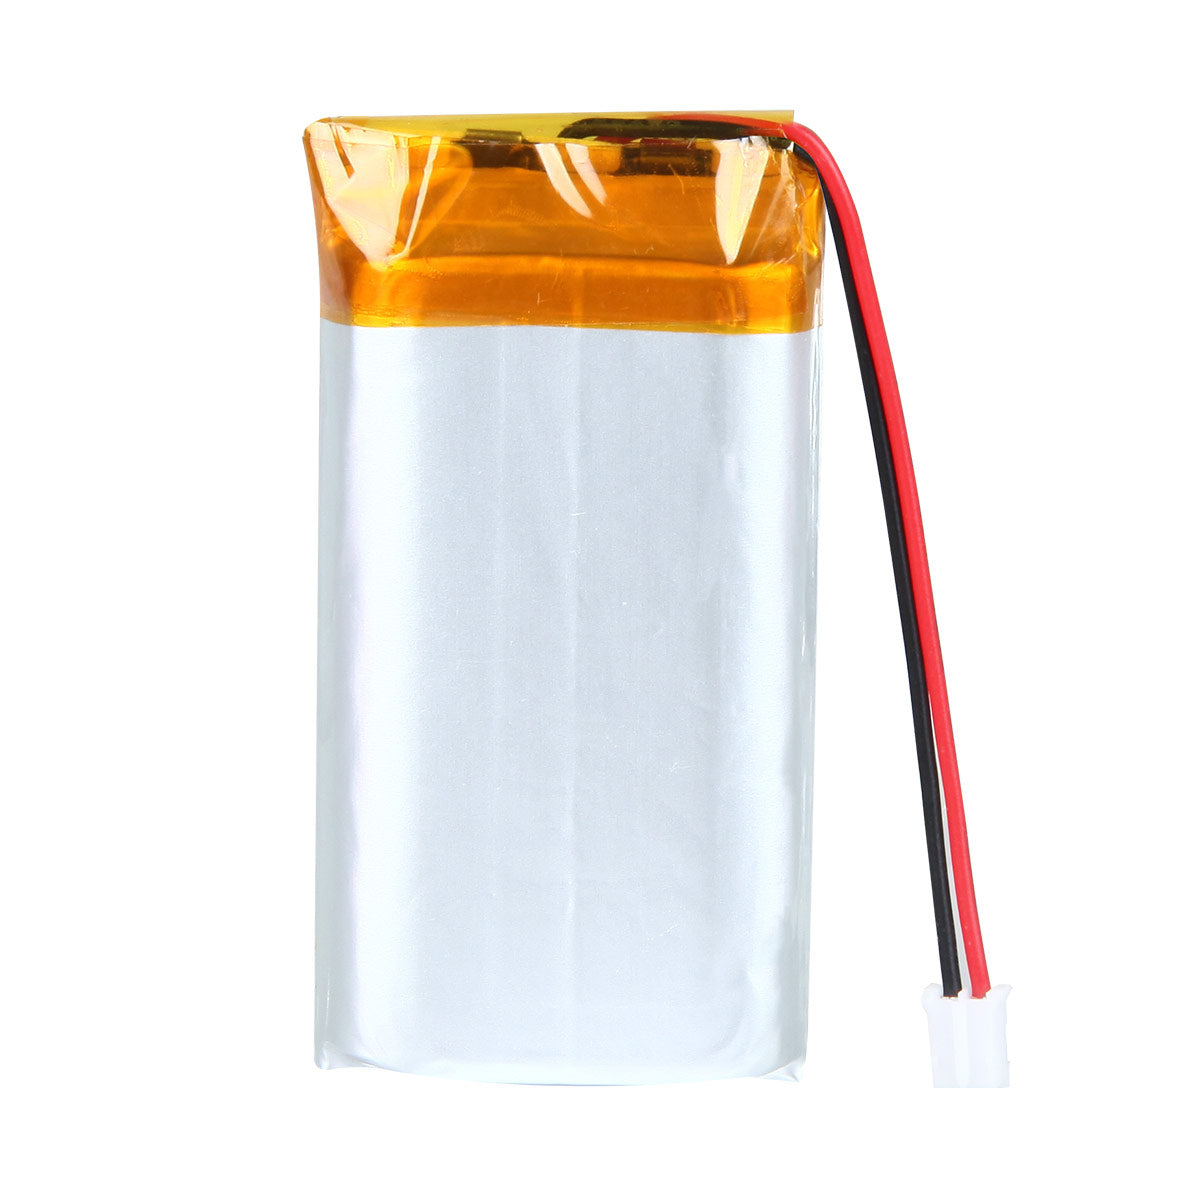 YDL 3.7V 1700mAh 112852 Rechargeable Lipo Battery with JST Connector - YDL Battery